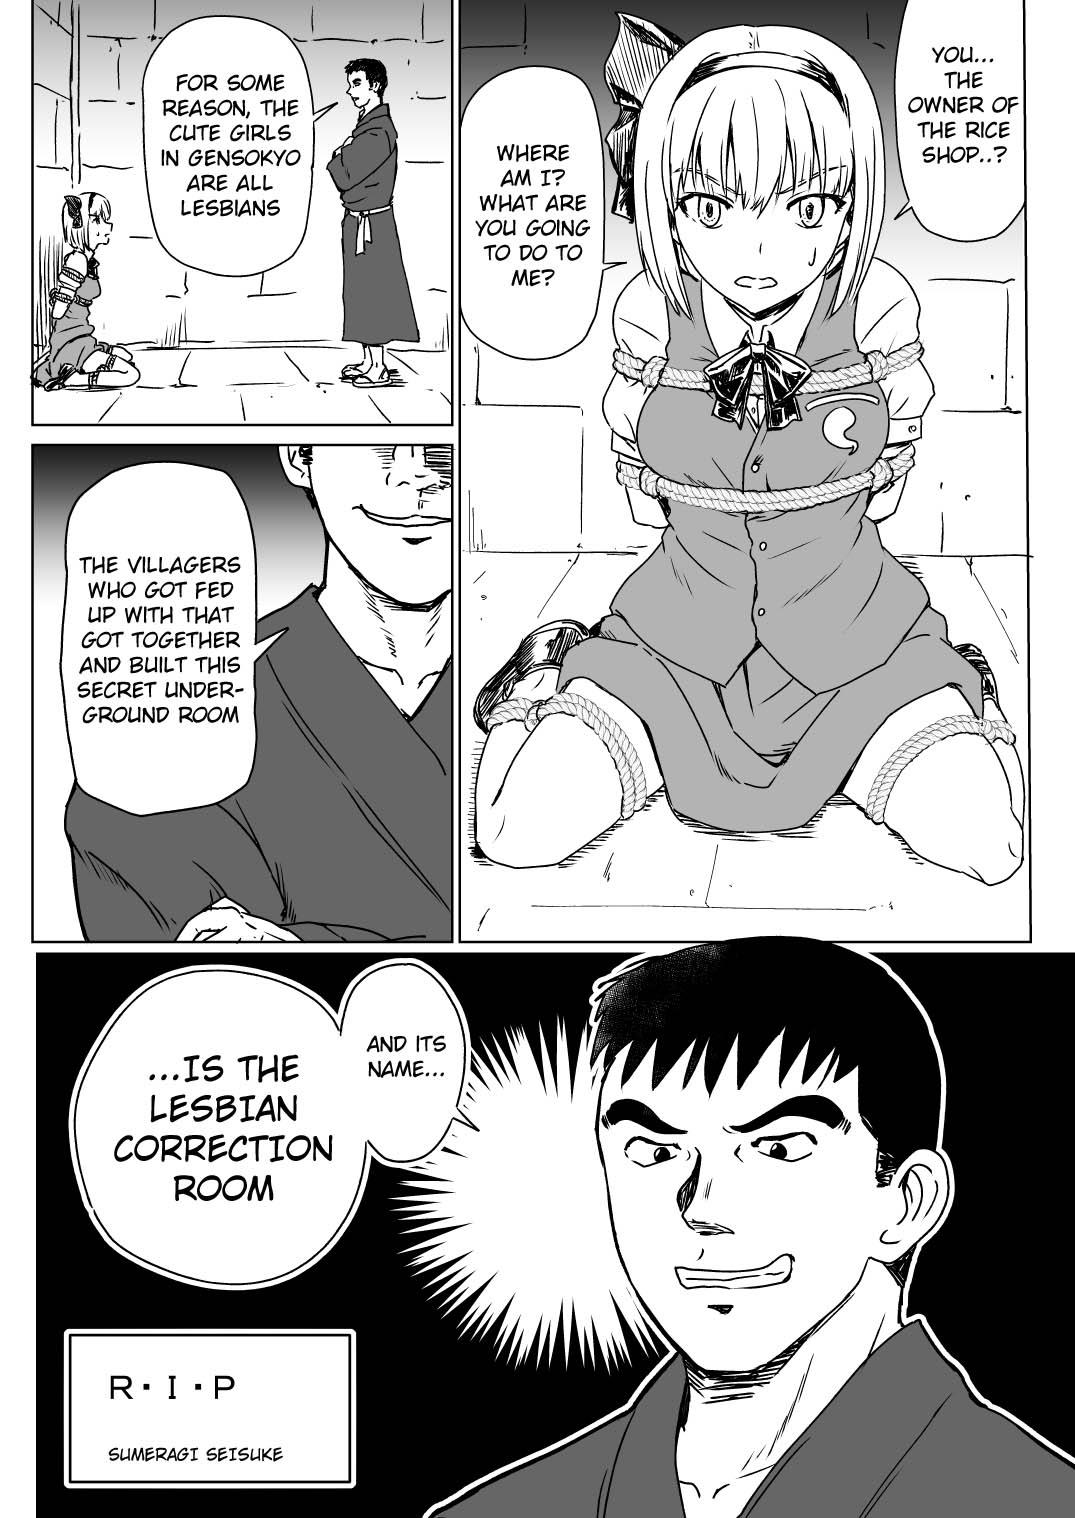 Masseur R. I. P. - Touhou project Stockings - Page 3